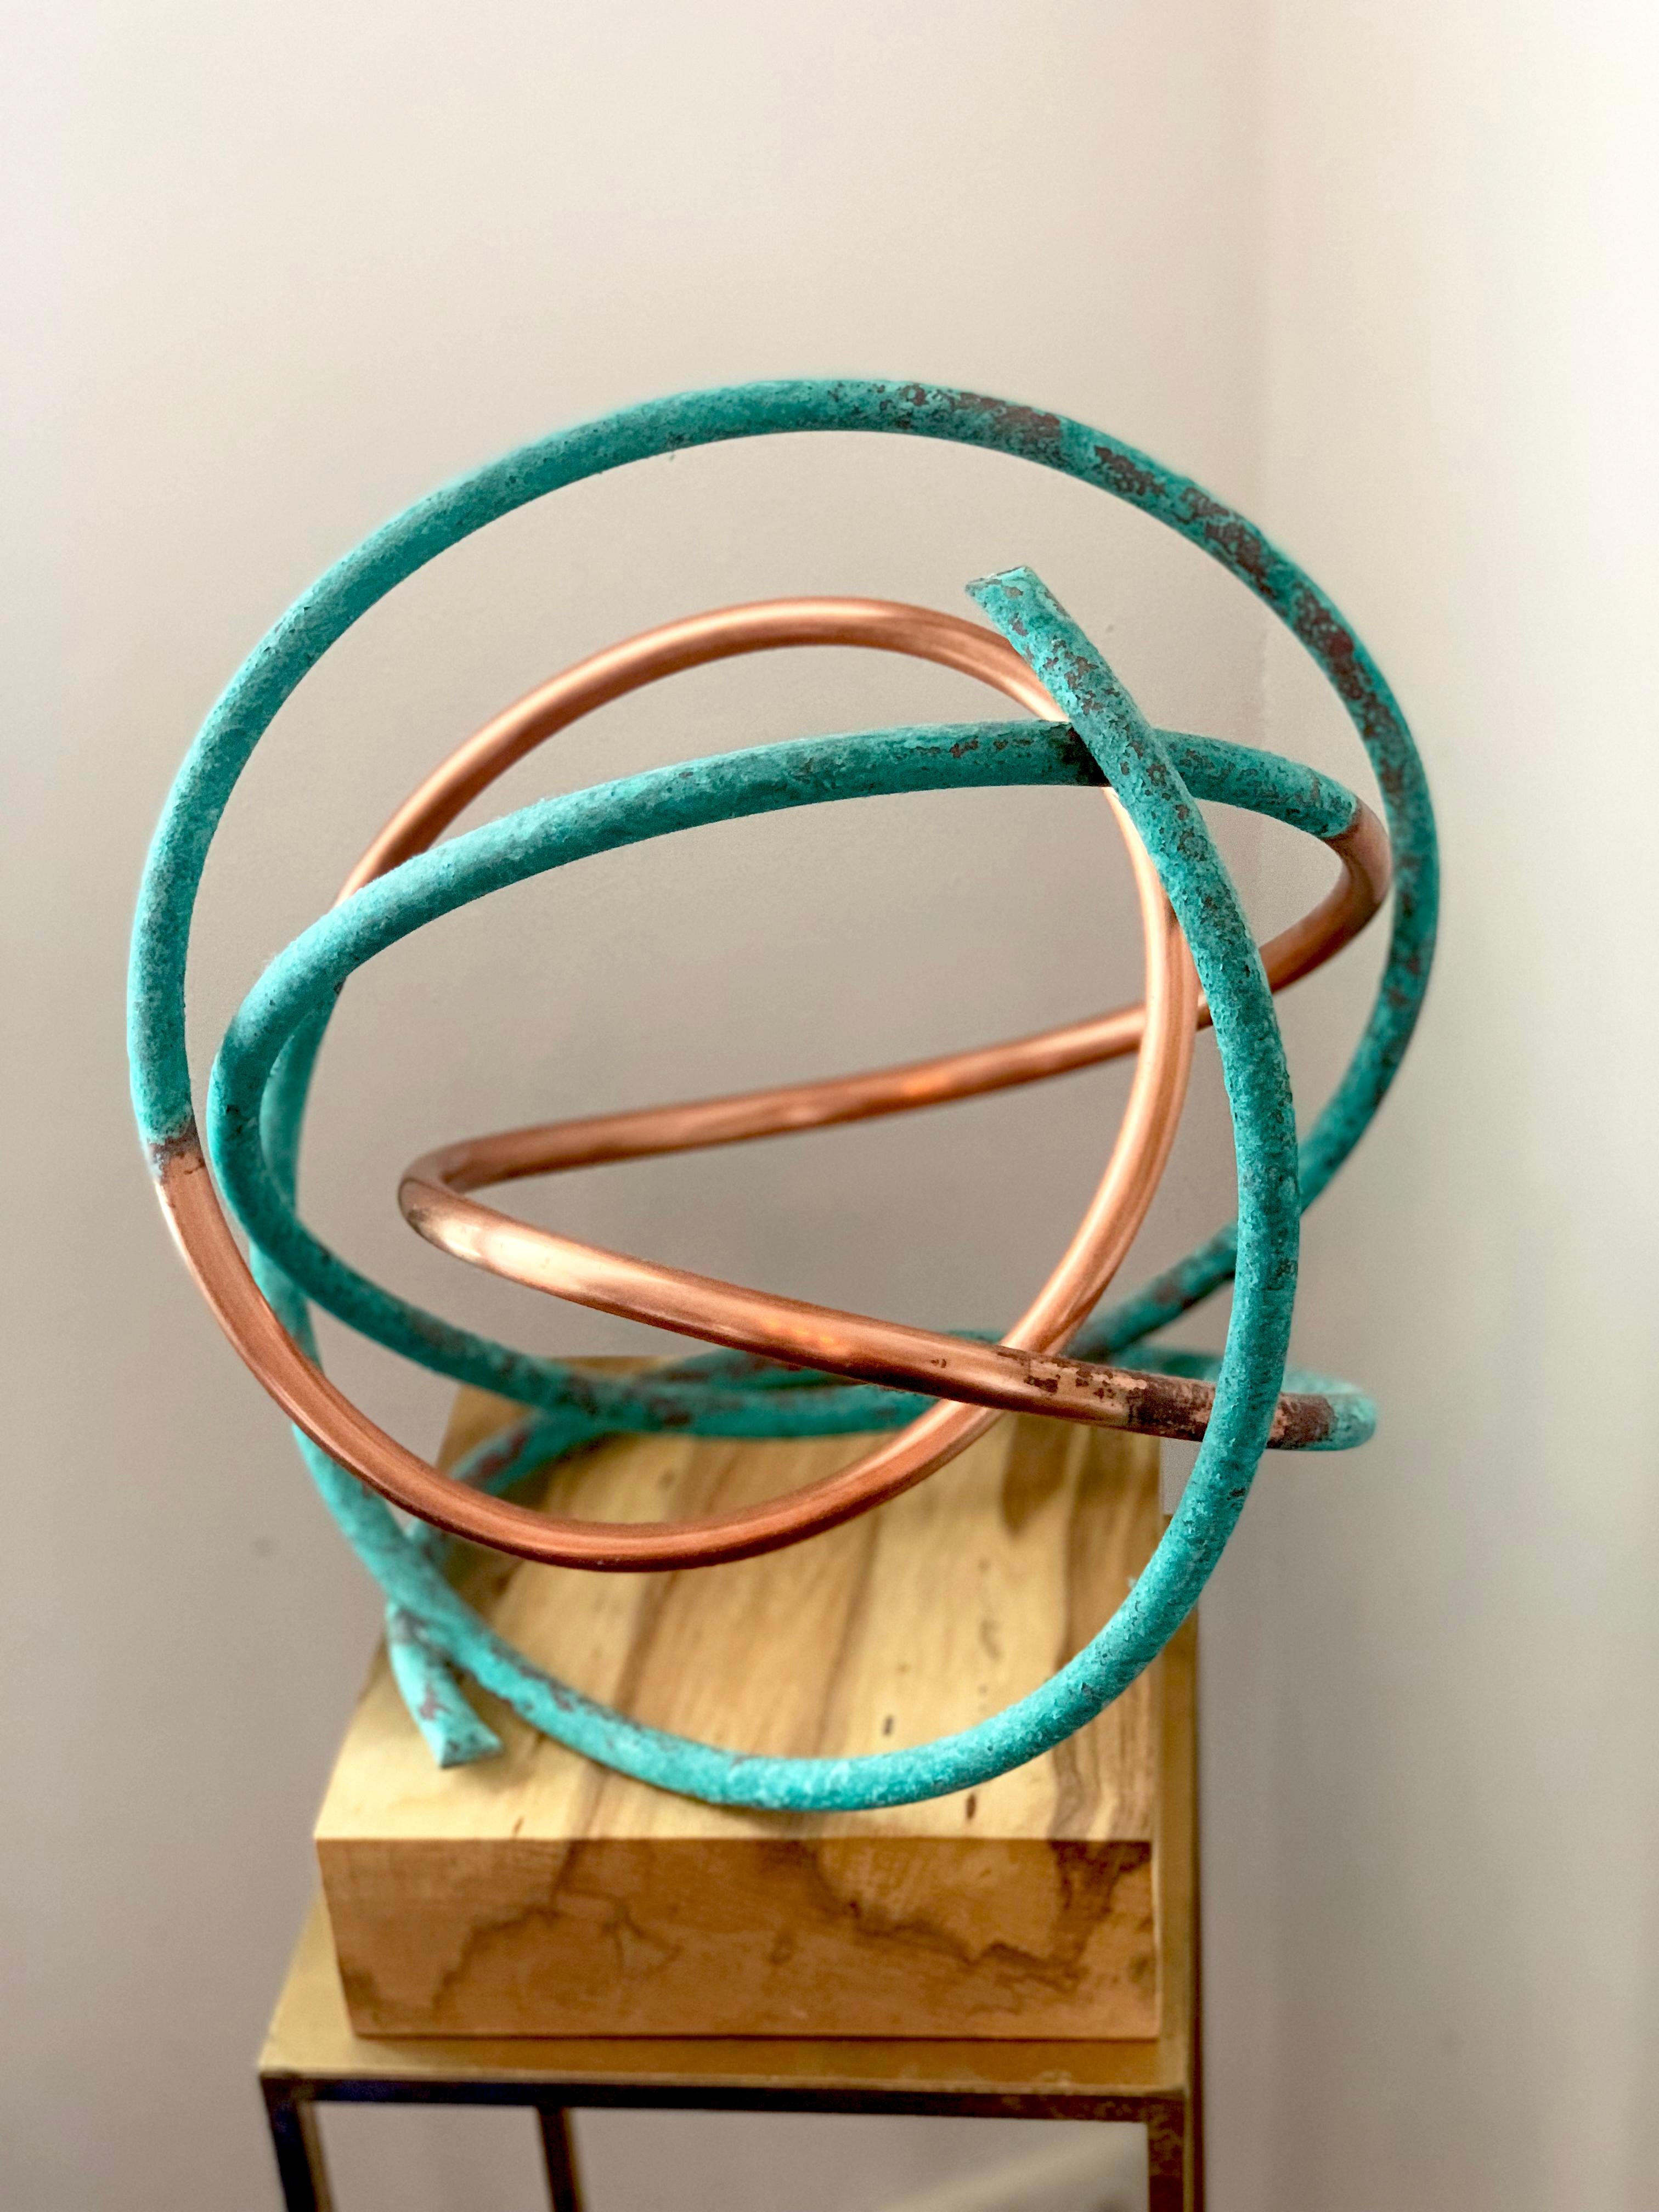 Copper in Verdigris Sculpture - Weather and polished copper on sycamore base 7